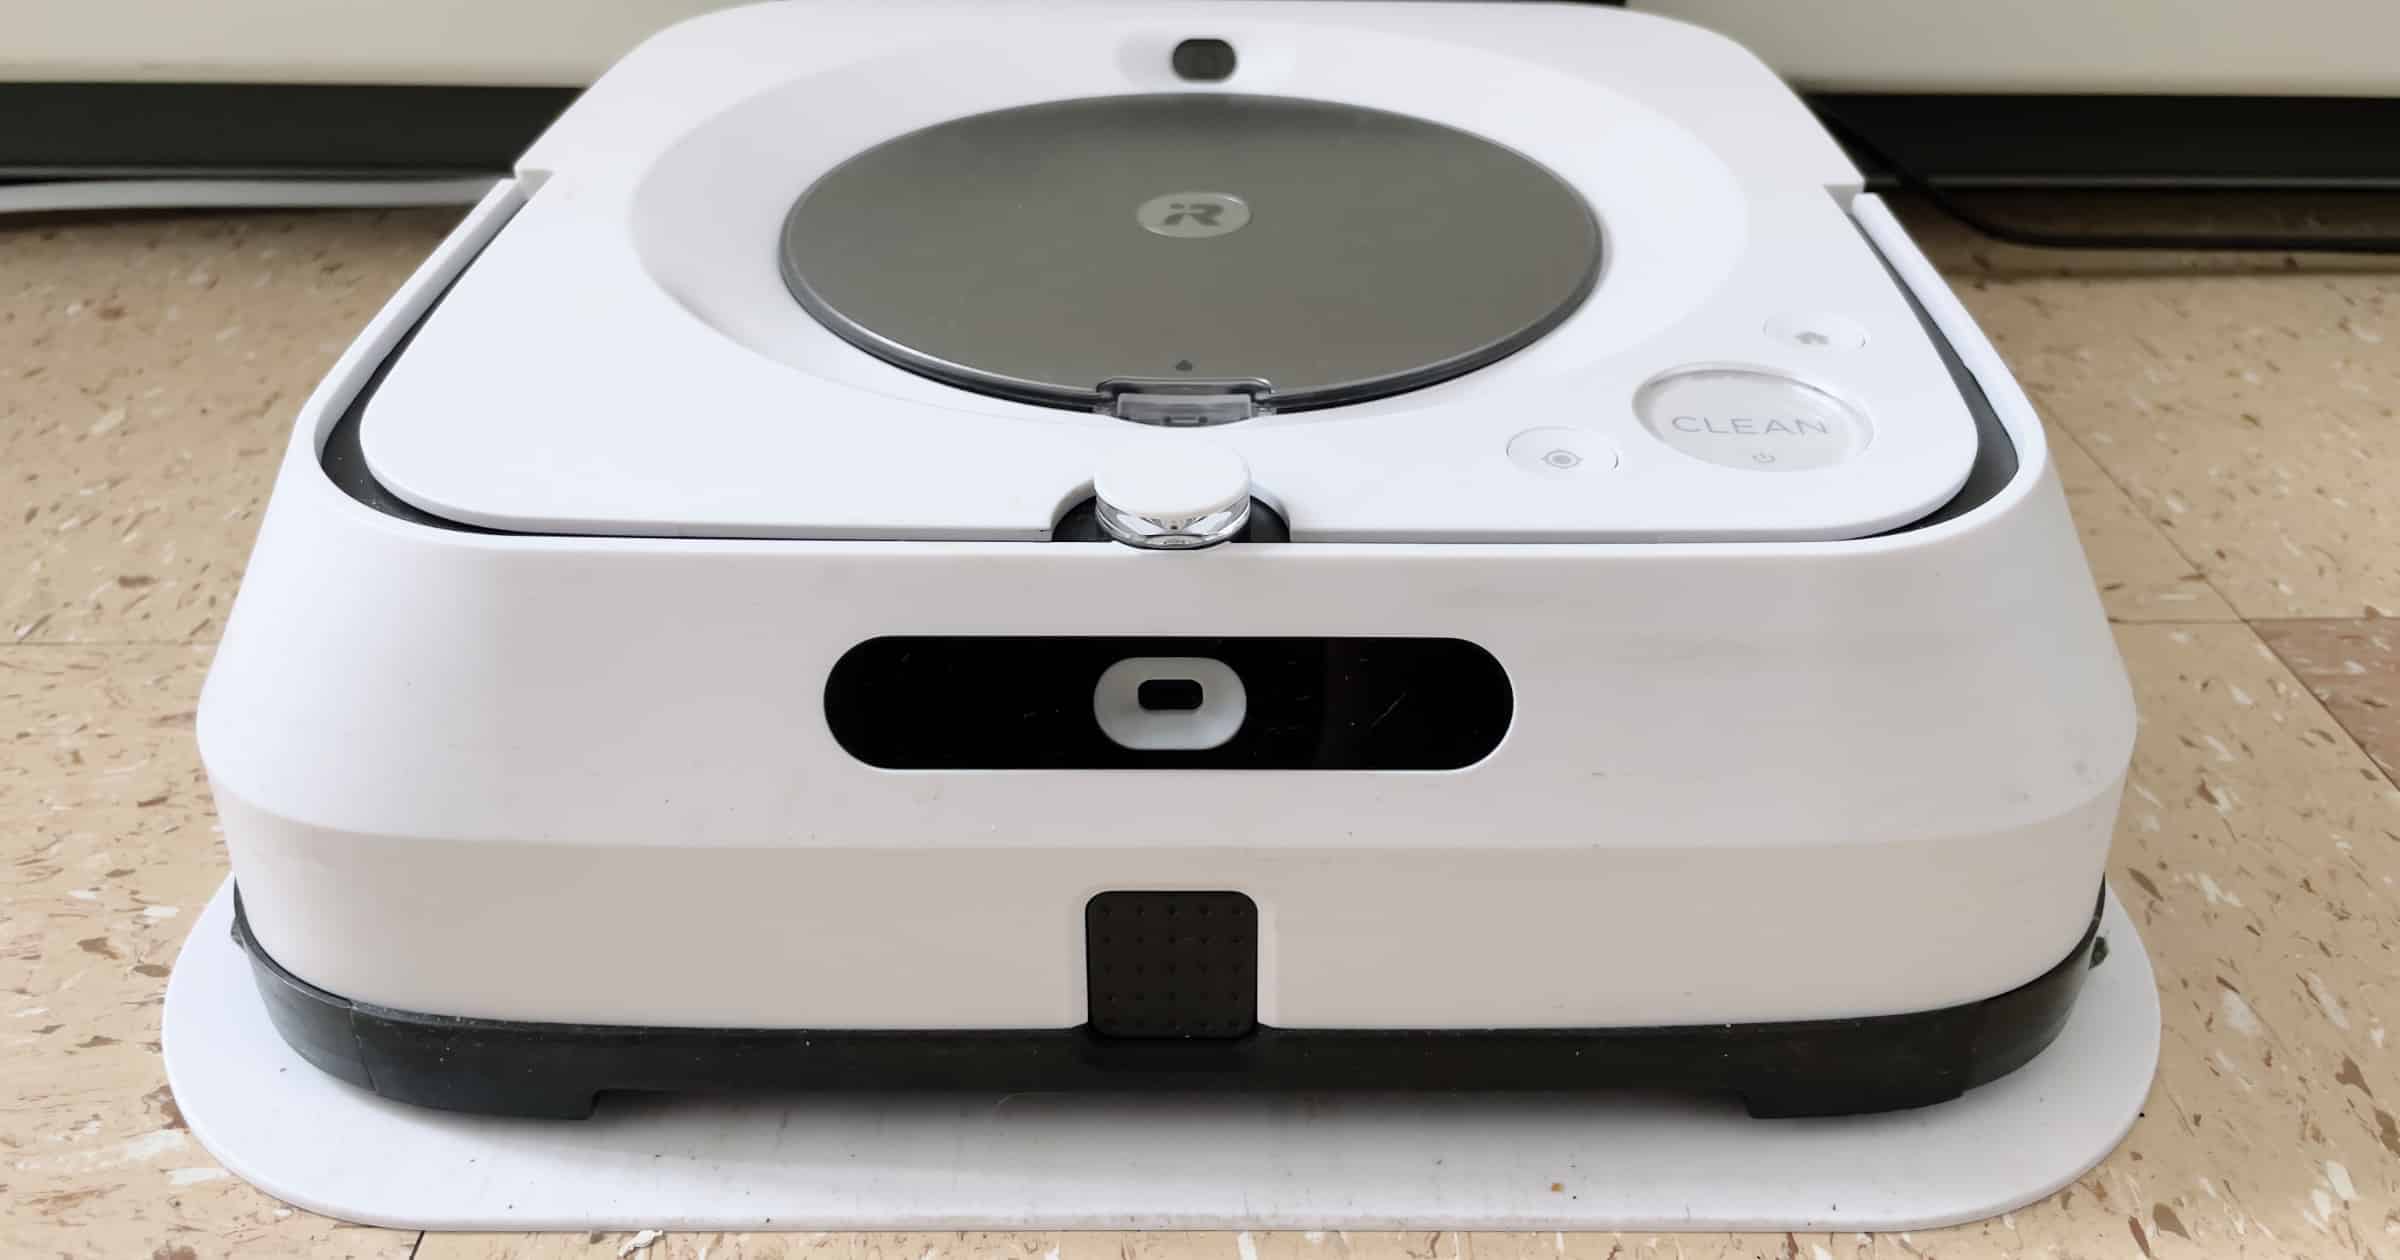 Review: iRobot’s Braava Jet M6 is a Thorough Creature